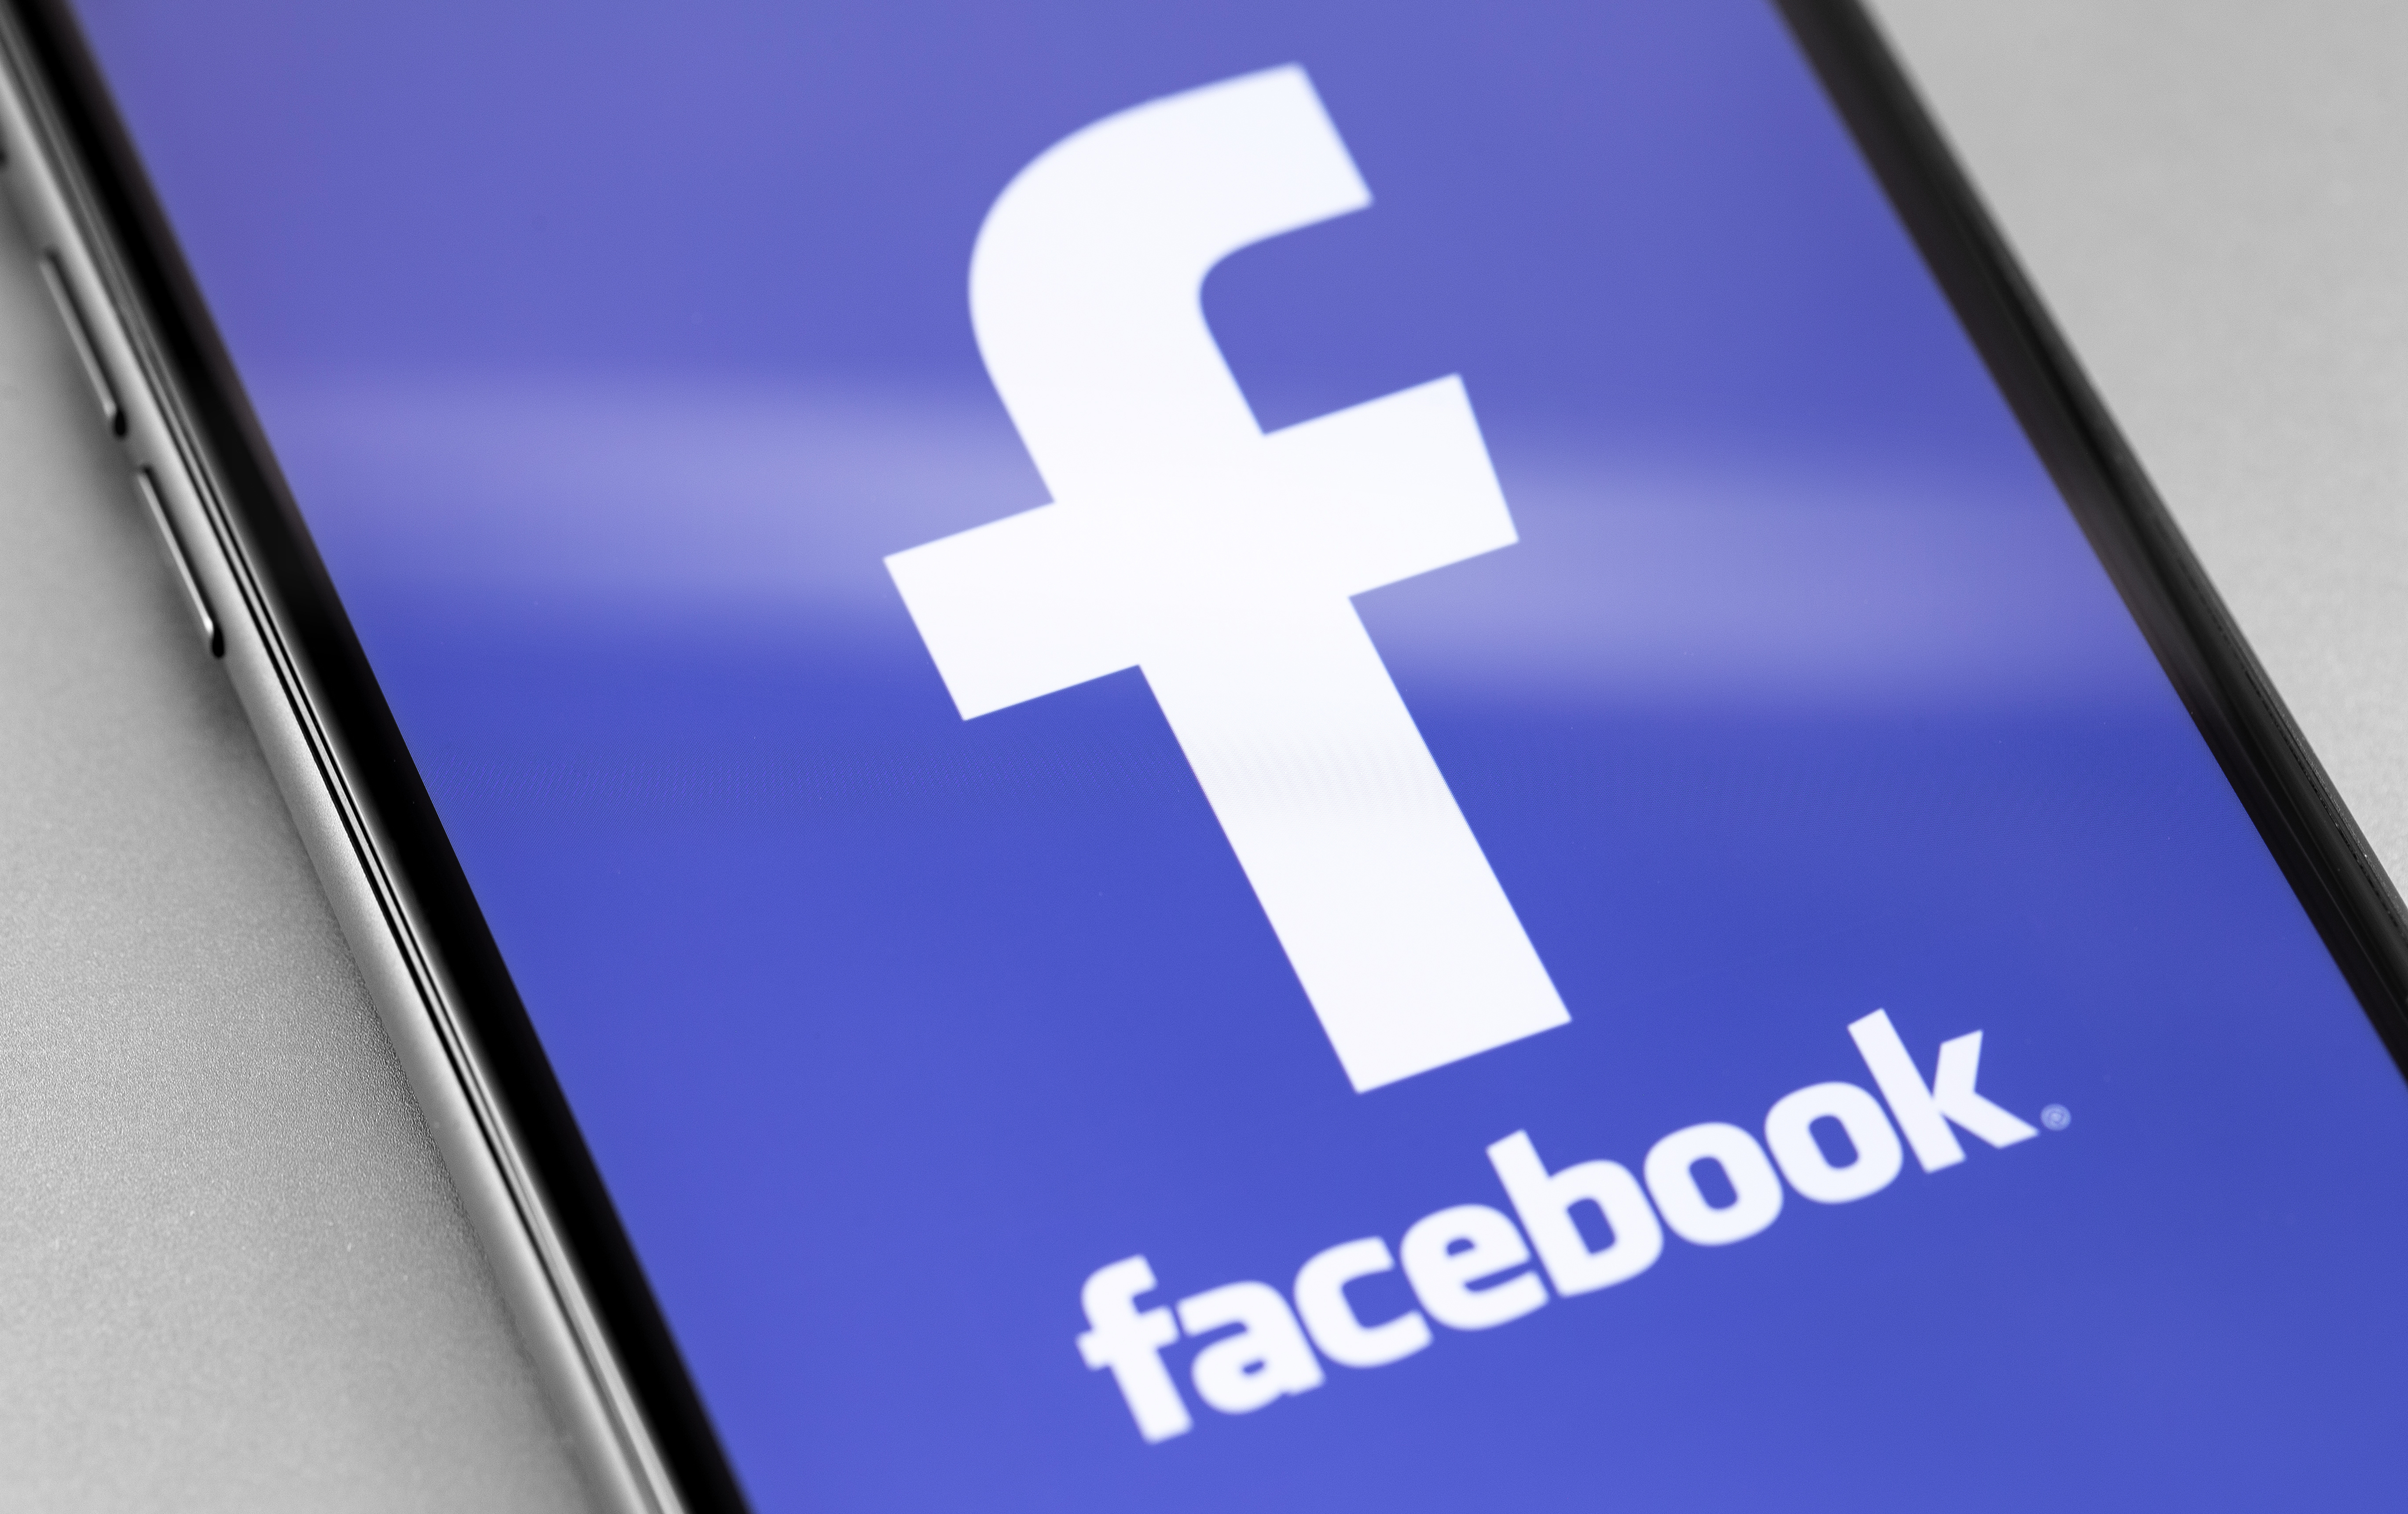 The Facebook app opens on a smartphone